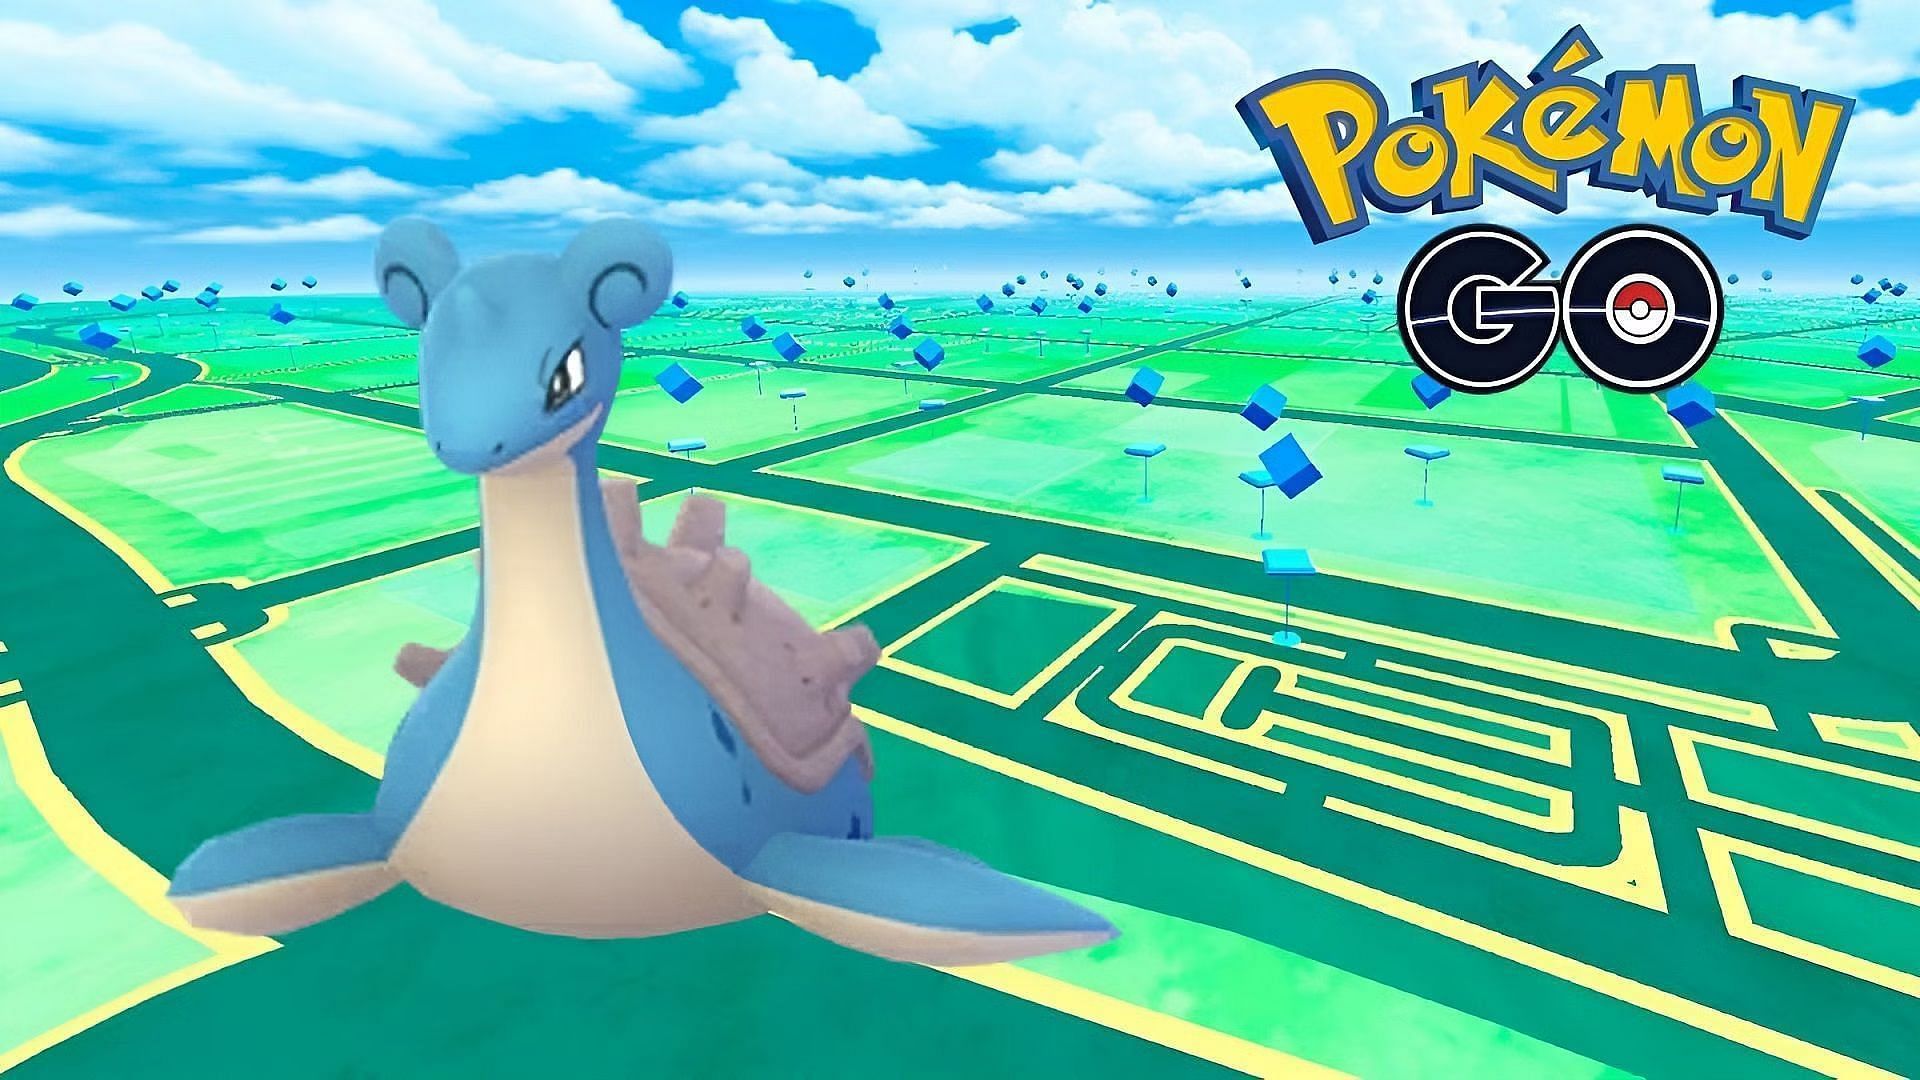 When catching Lapras in the wild, trainers get 3 Candy 100 Stardust (Image via Niantic)